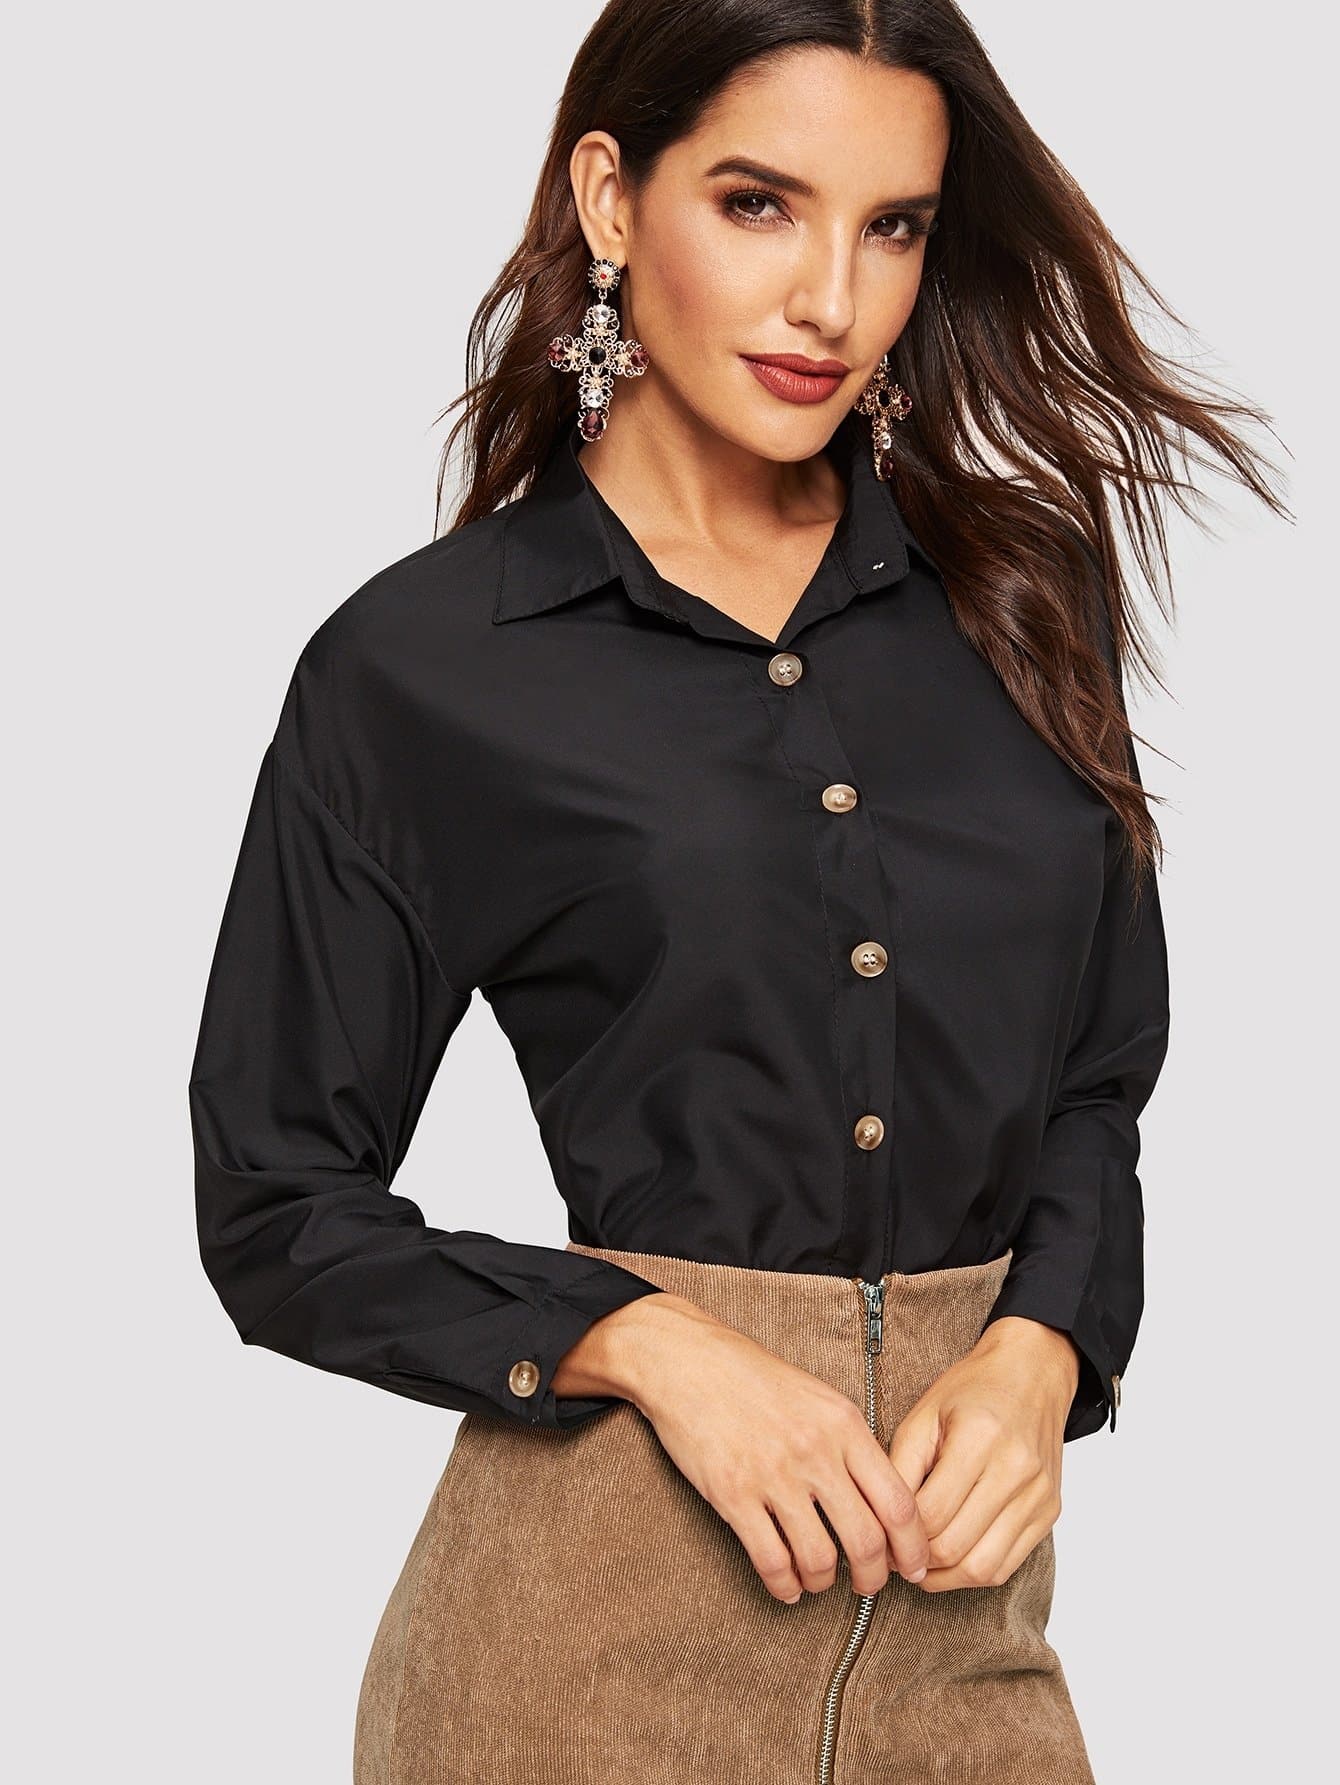 Long Sleeve Solid Button Up Curved Hem Shirt